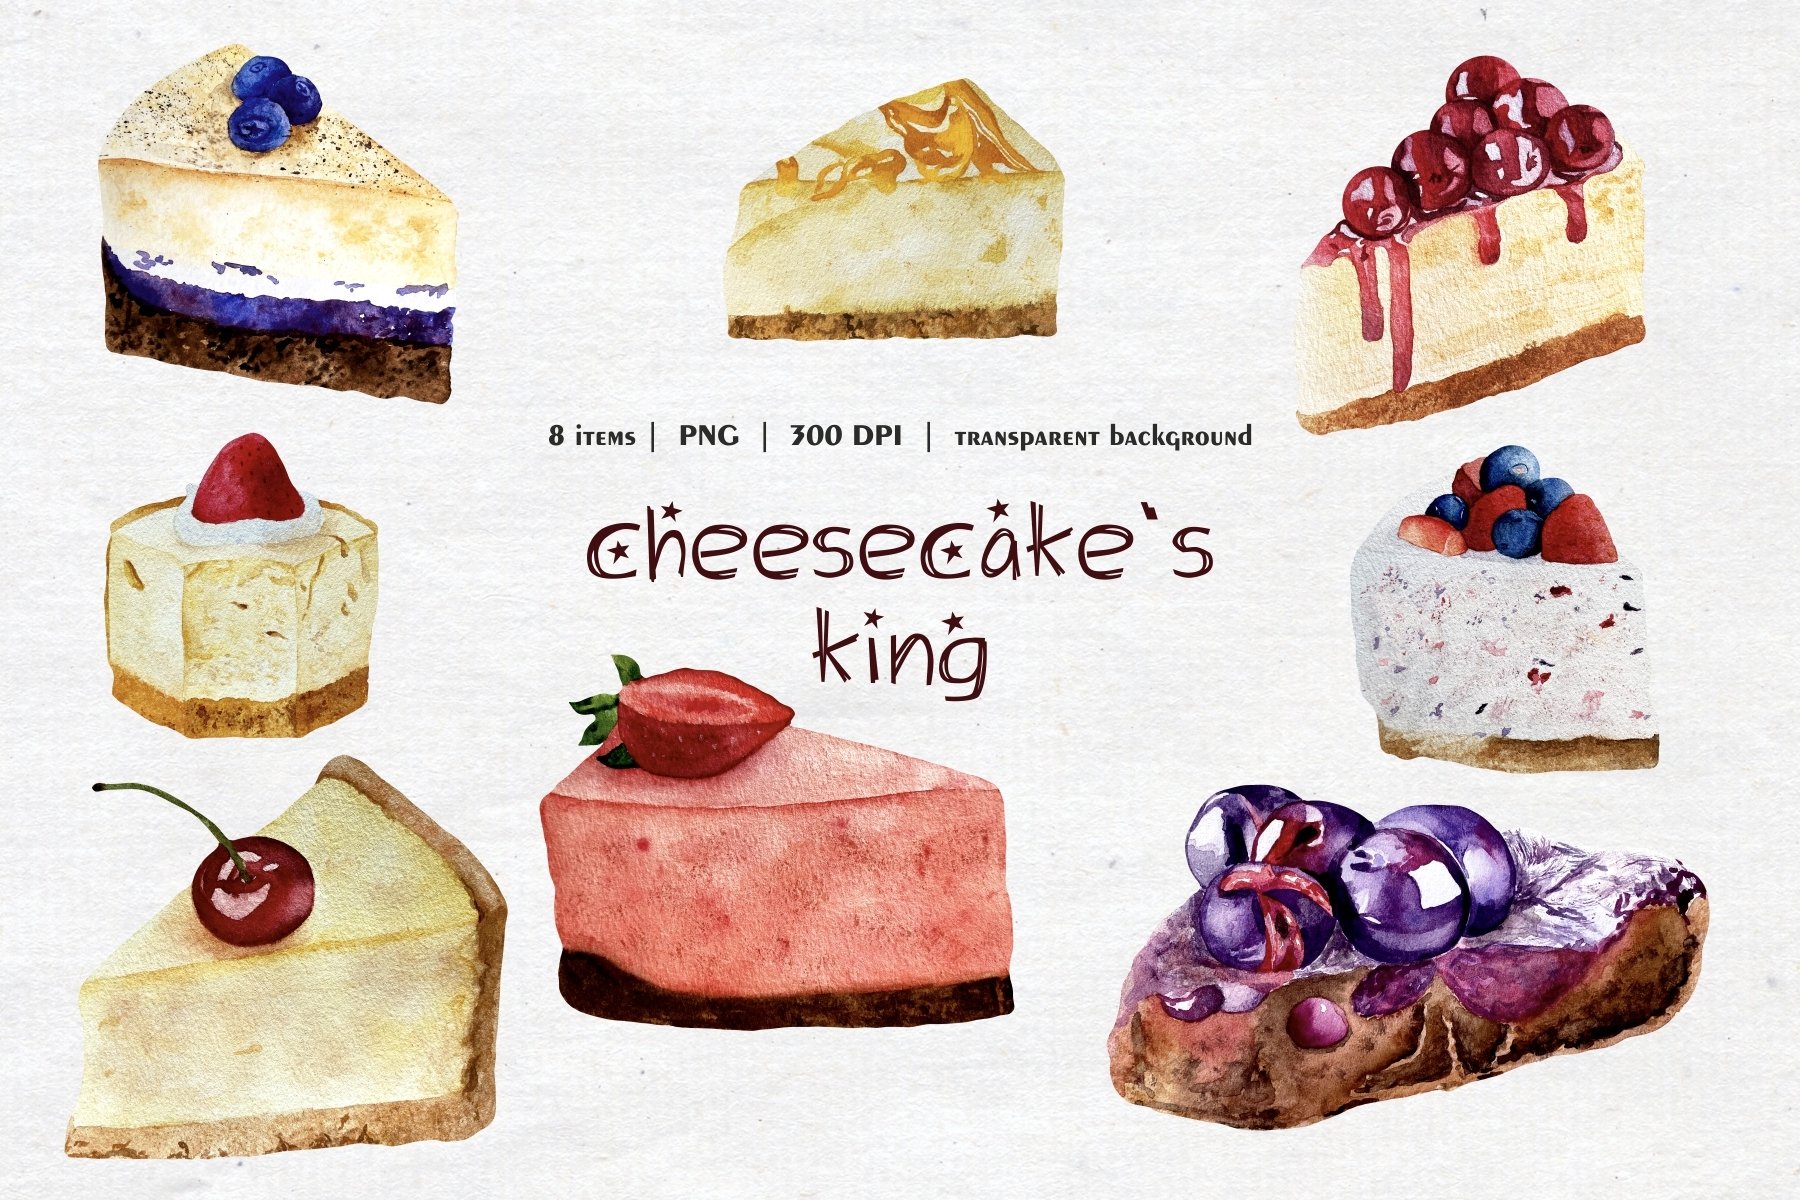 Charming set of images of cheesecakes on a white background.